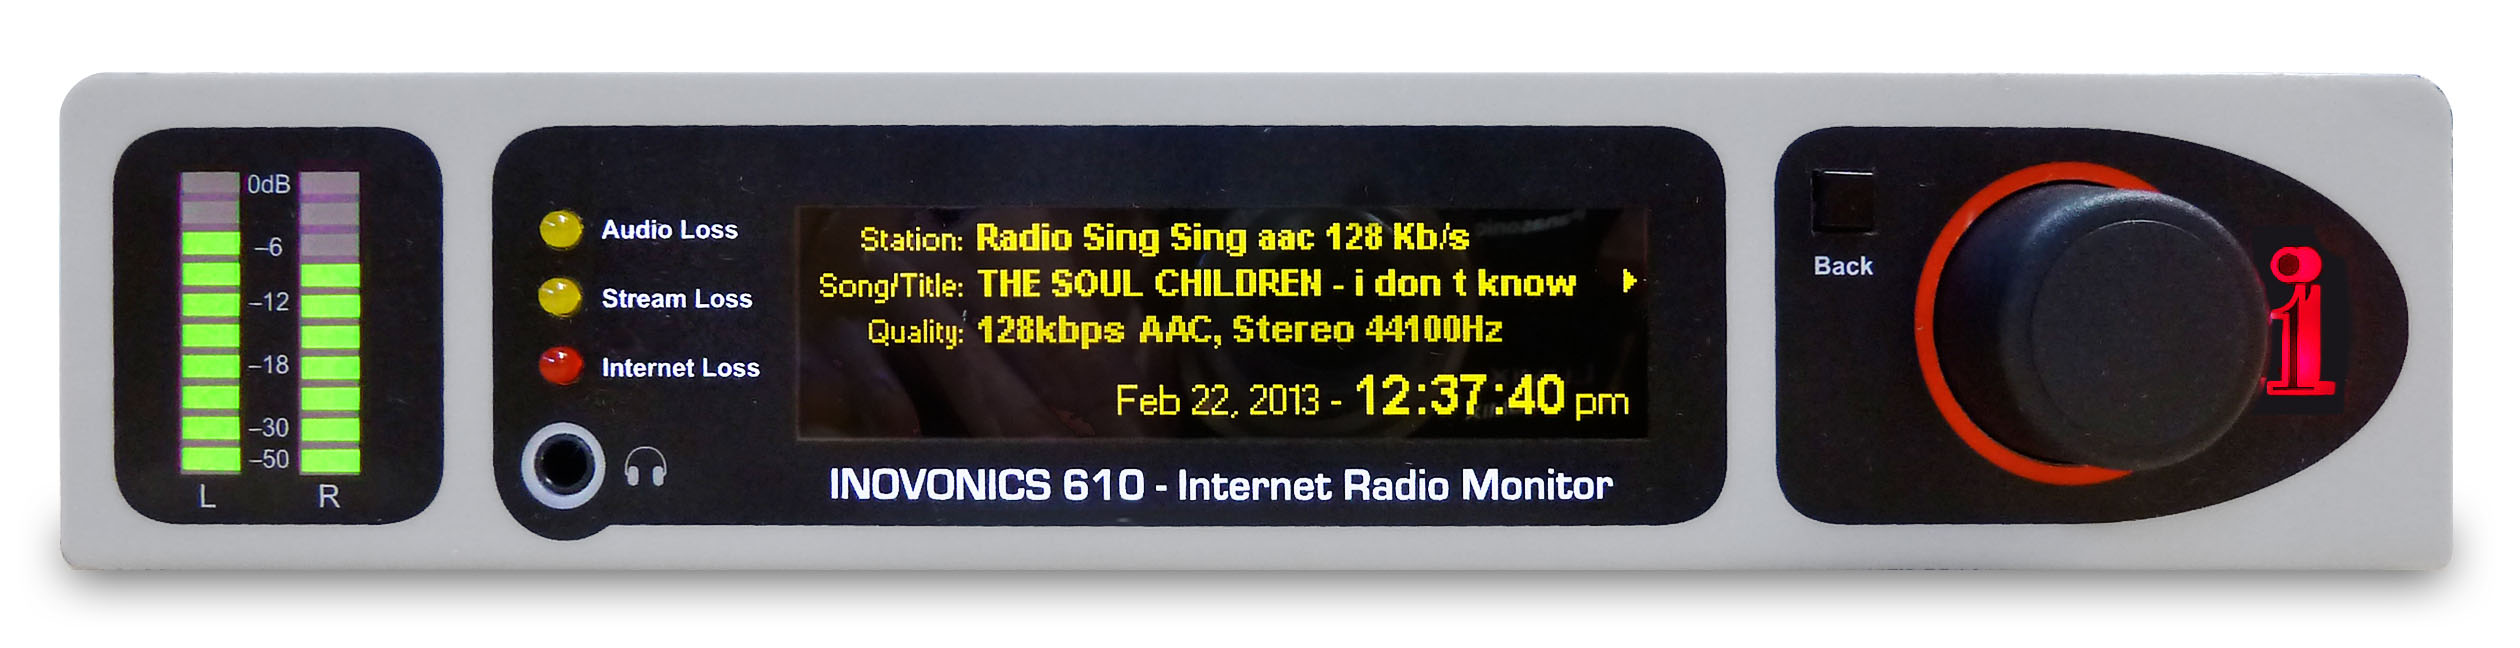 streamers use AM/FM radio to connect – Radio Connects